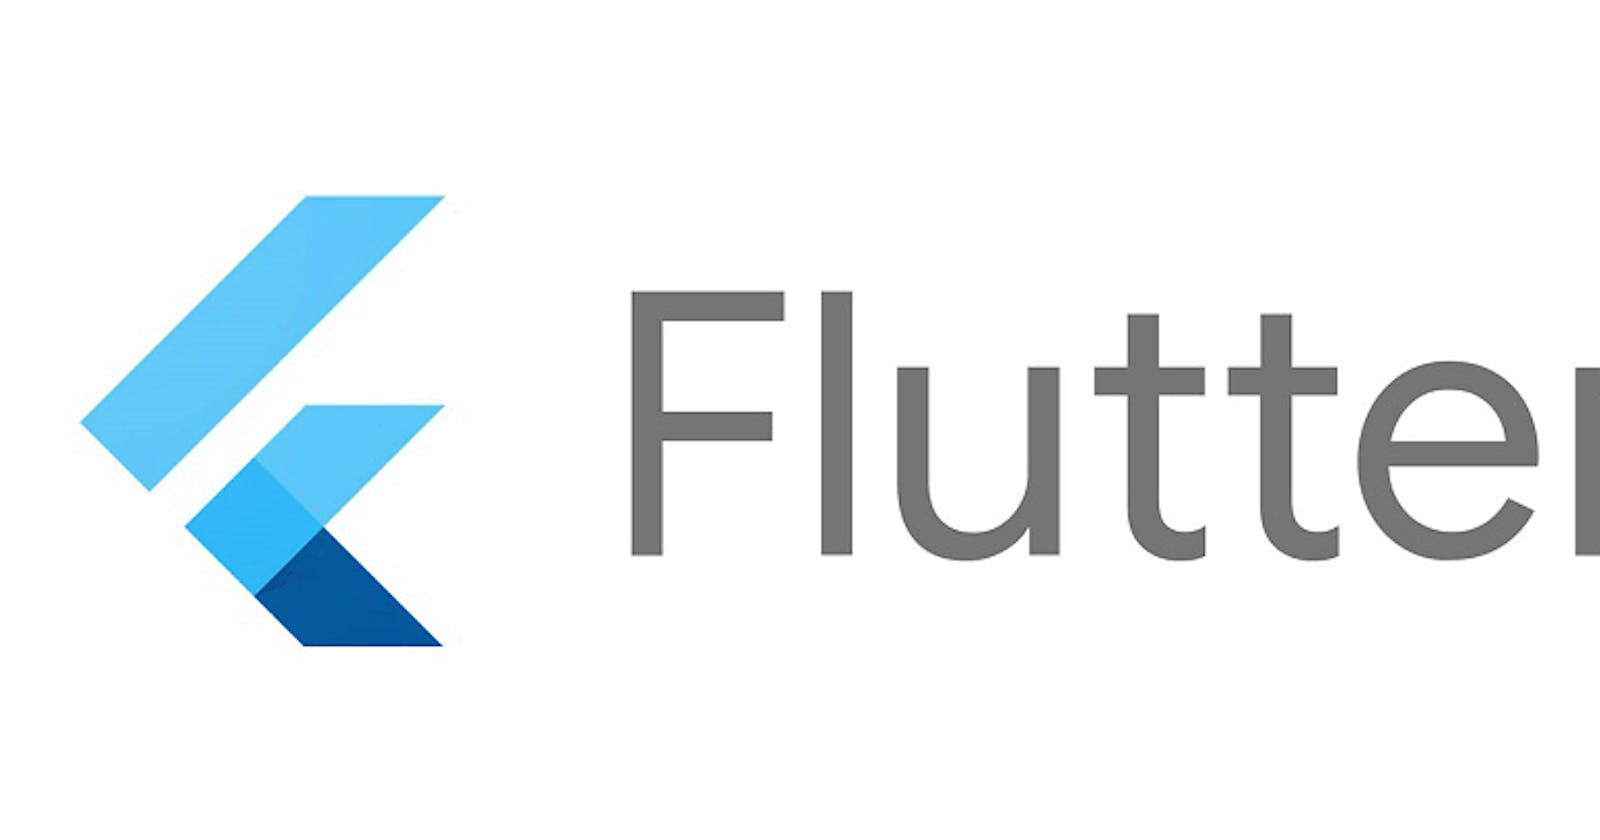 How to set up Flutter Environment on your System ?